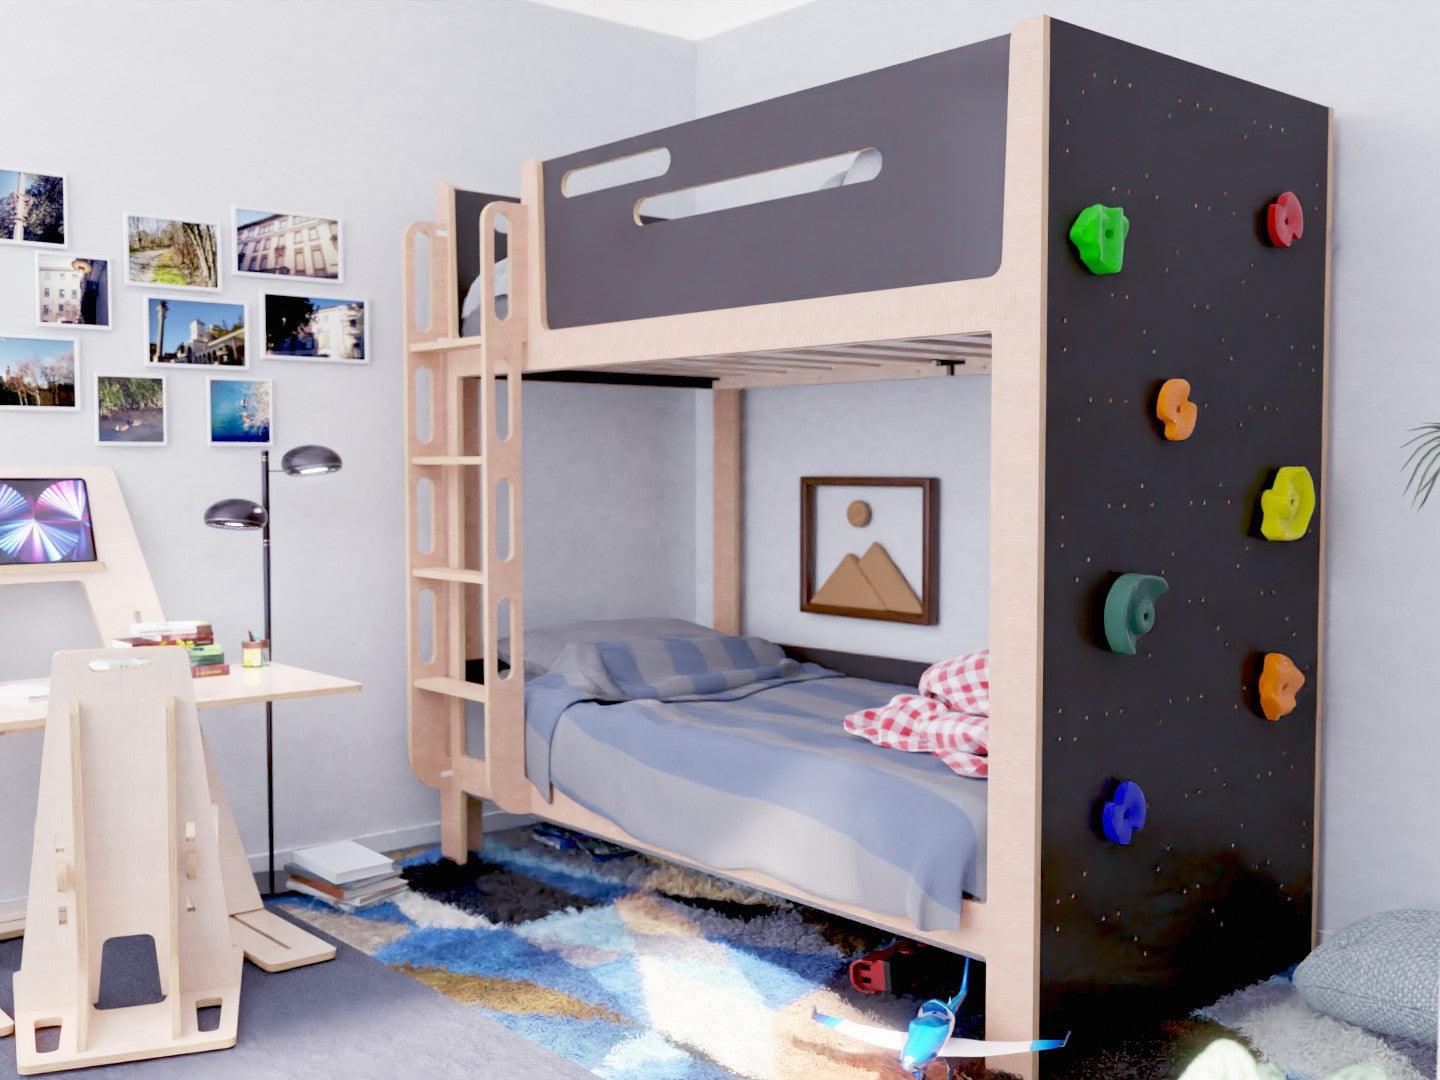 Experience an elevated sleep with our multifunctional bunk beds with rock climbing wall.